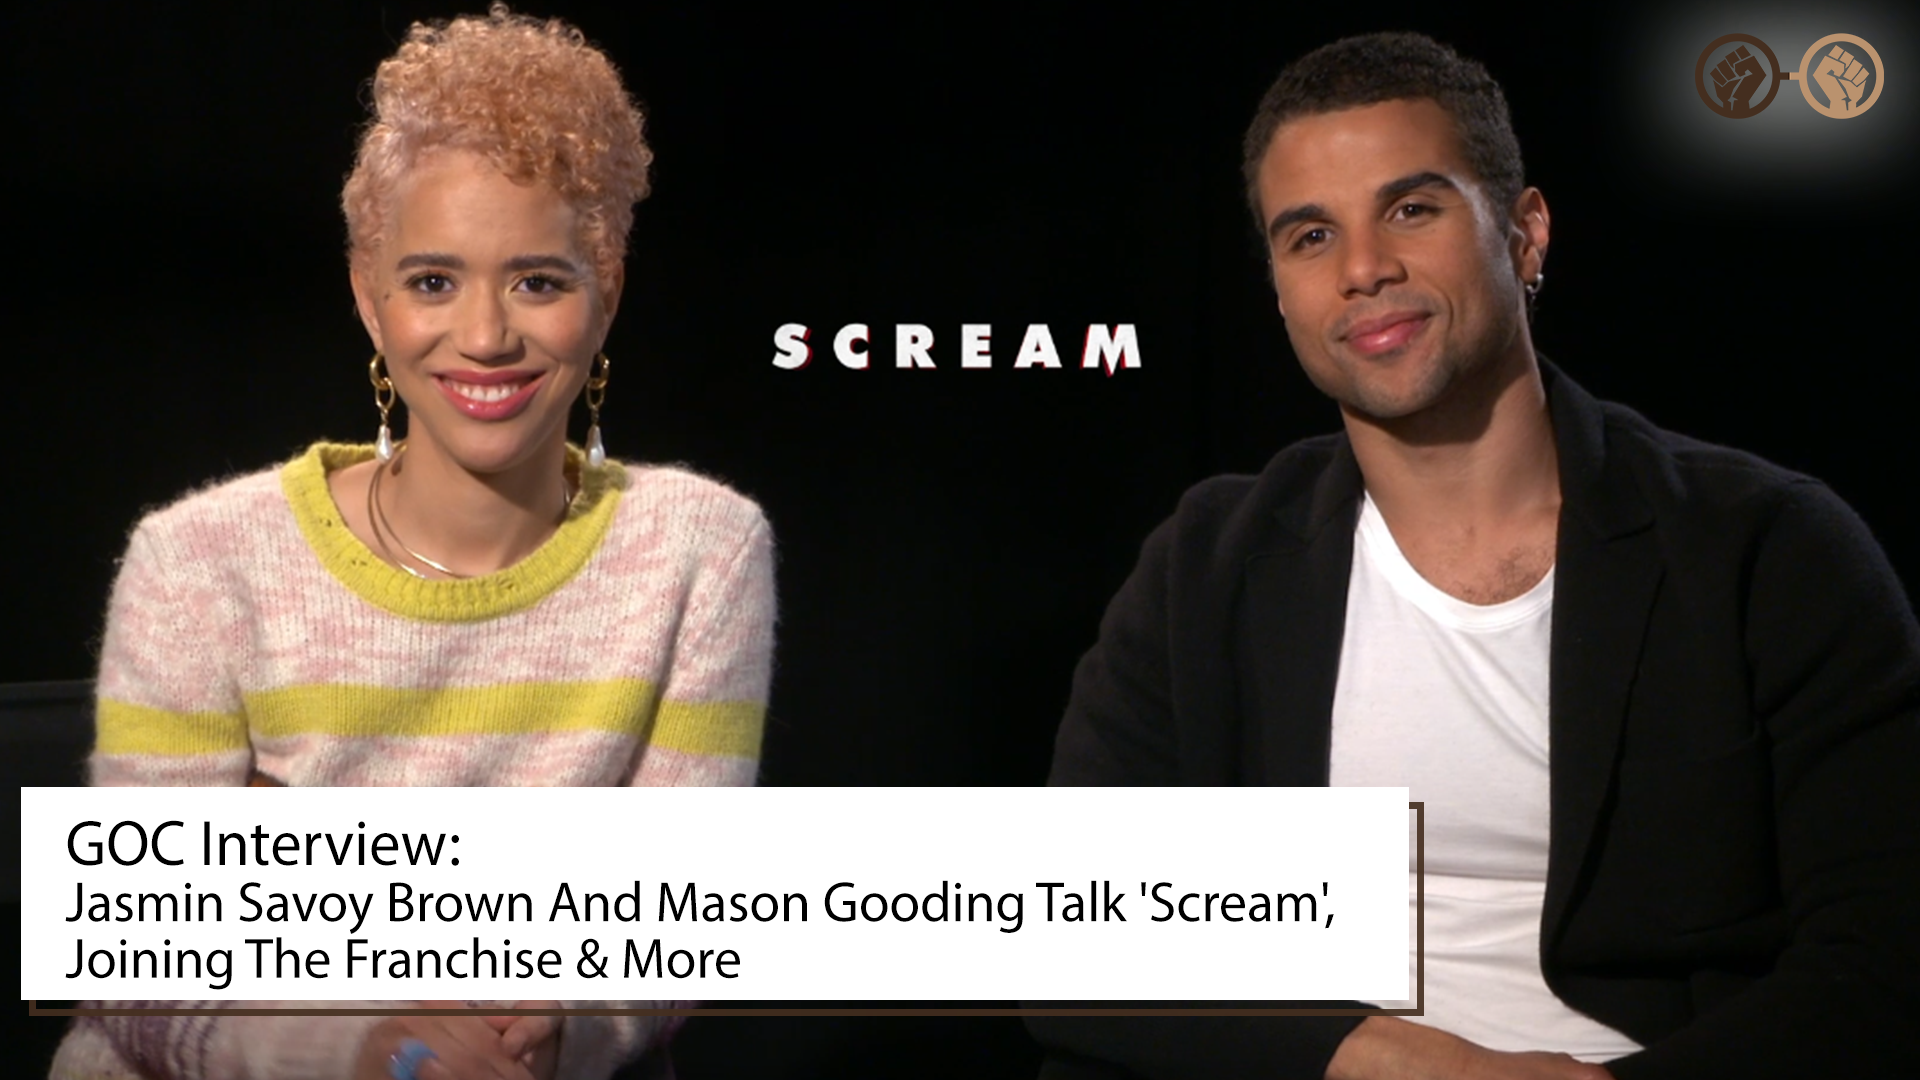 Interview: Jasmin Savoy Brown And Mason Gooding Talk ‘Scream’, Joining The Franchise & More